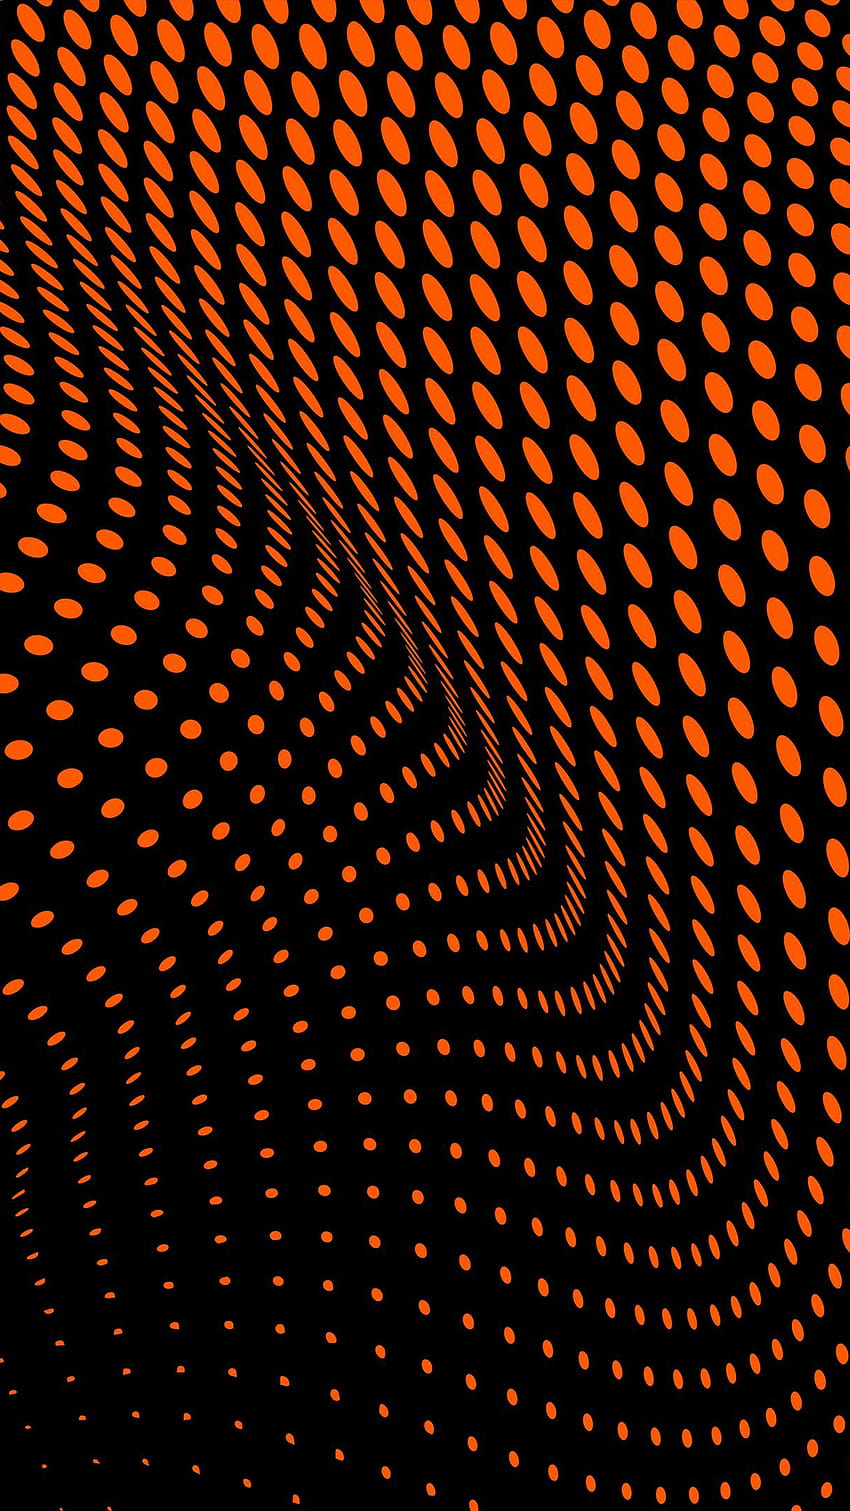 Orange Mesh Points Distortion Black Backgrounds Abstract, iphone black and orange HD phone wallpaper